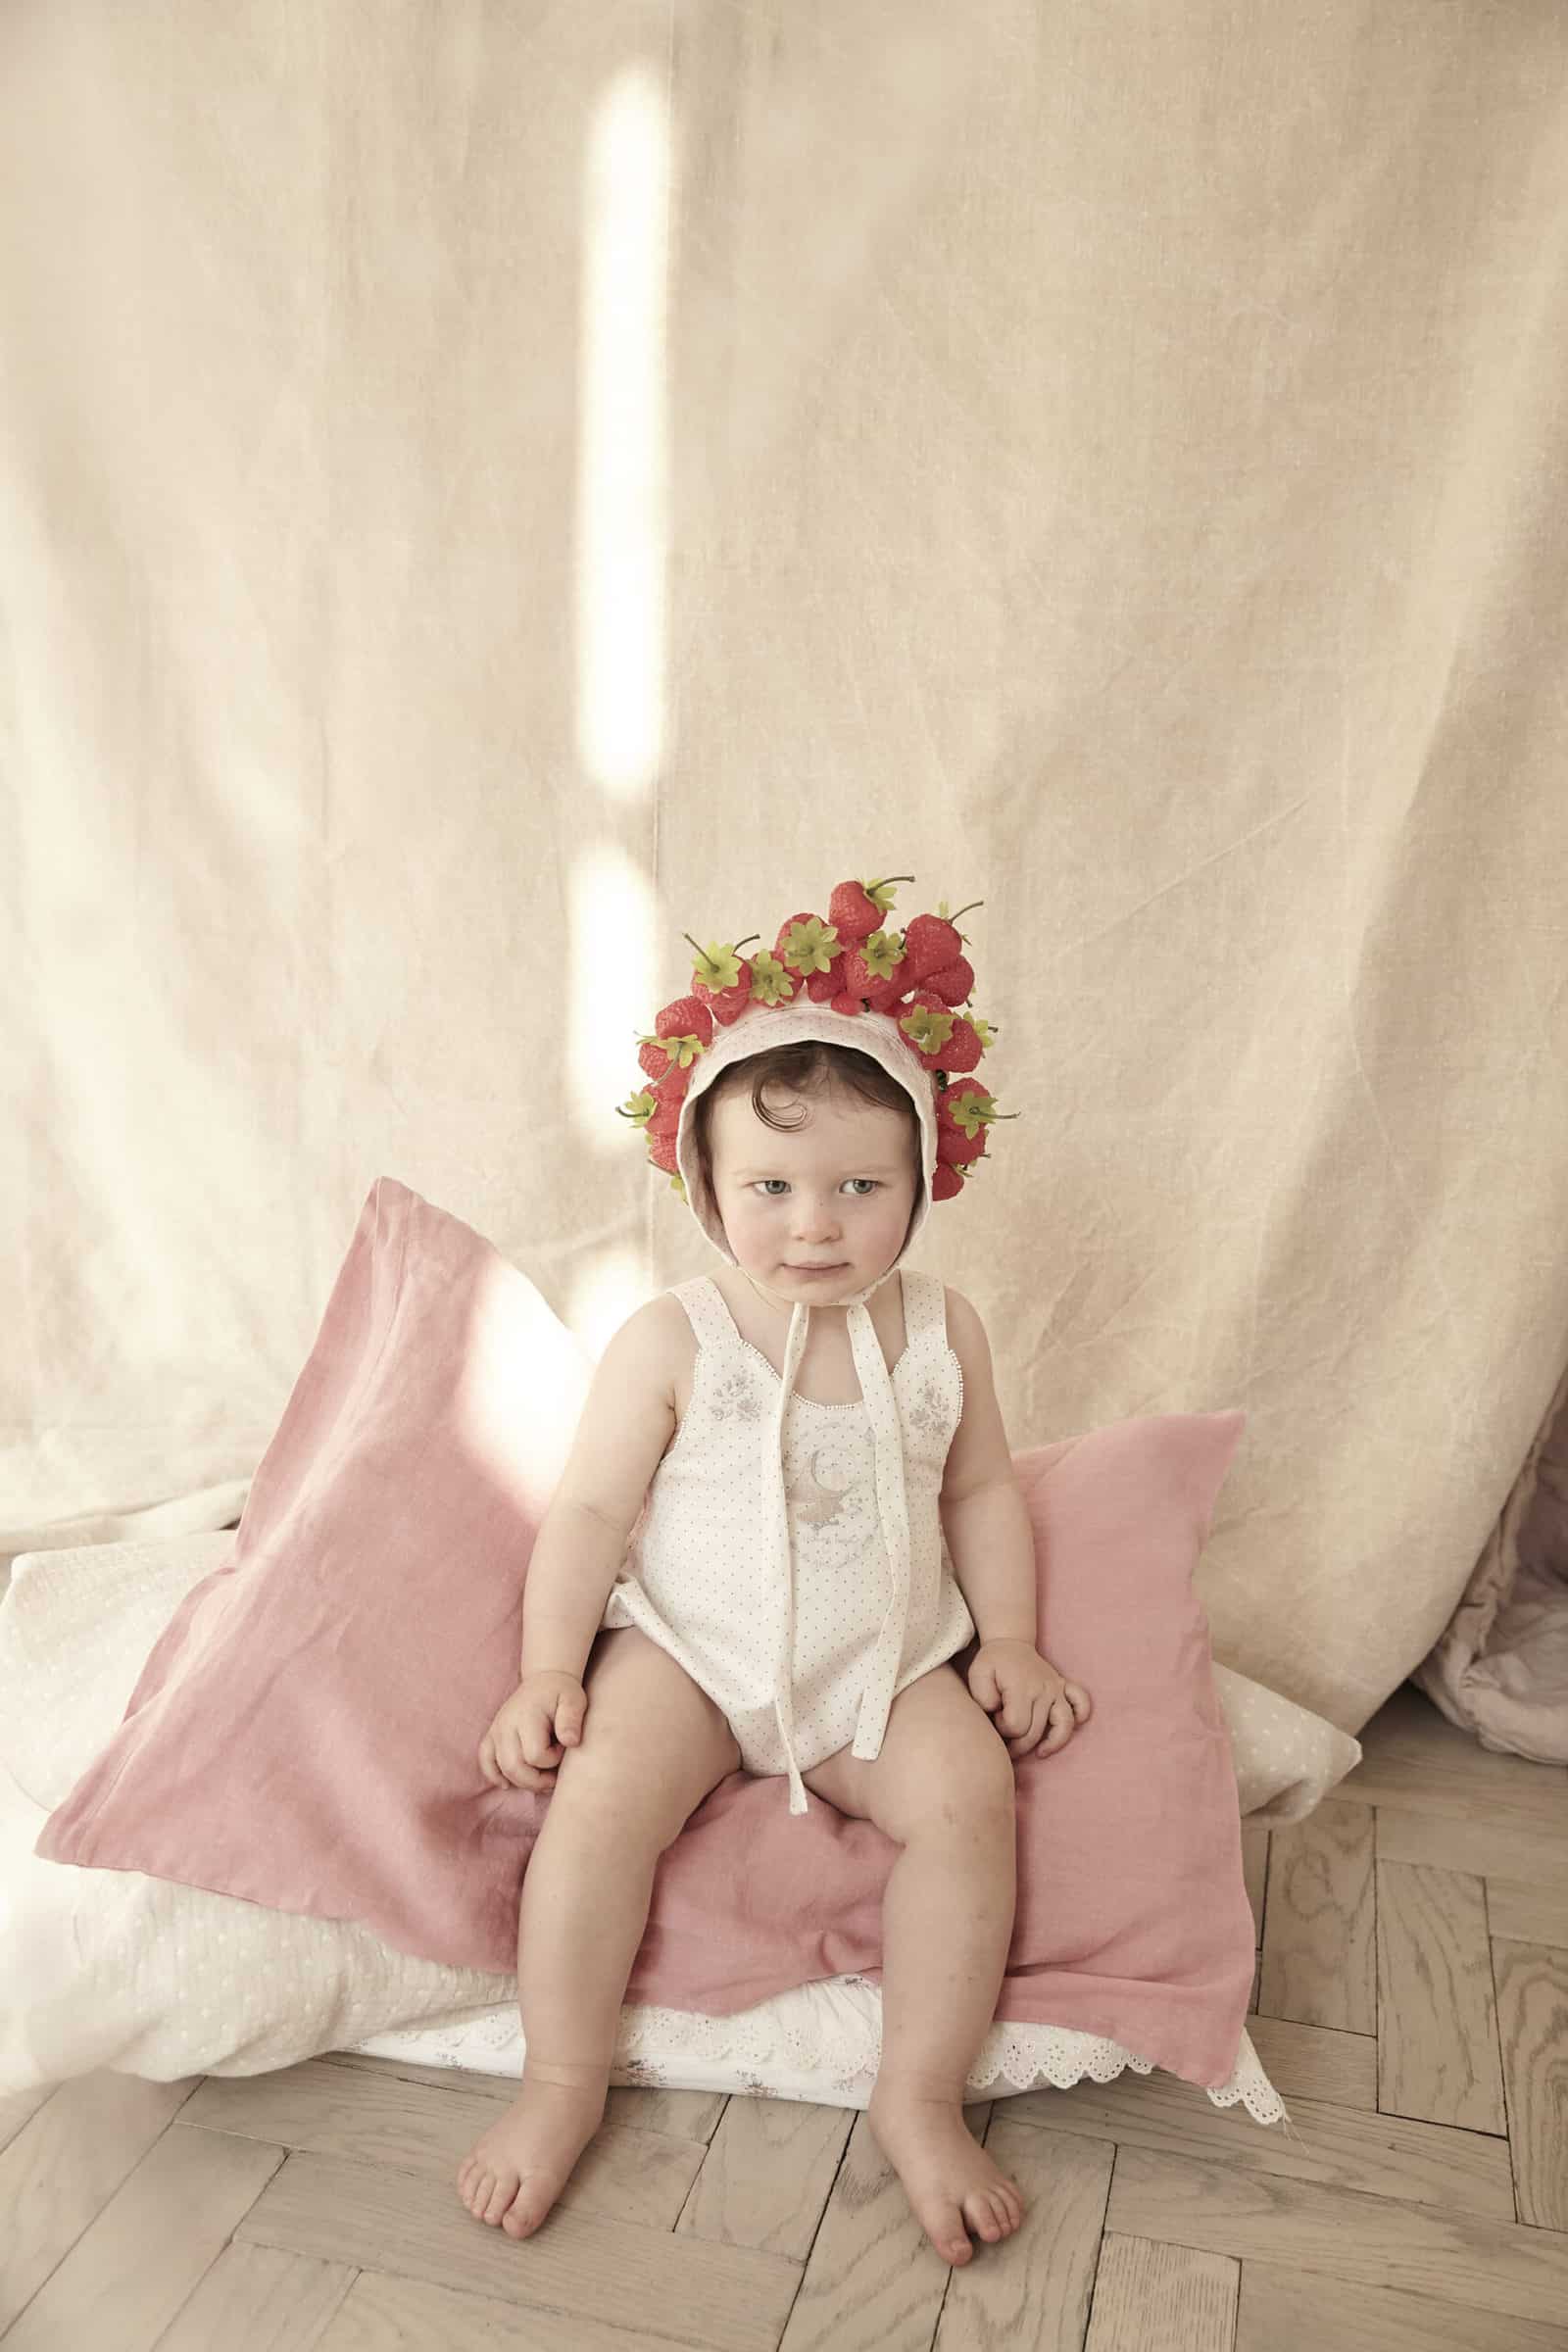 Strawberries and Cream is a luxury British baby and girlswear brand SS21